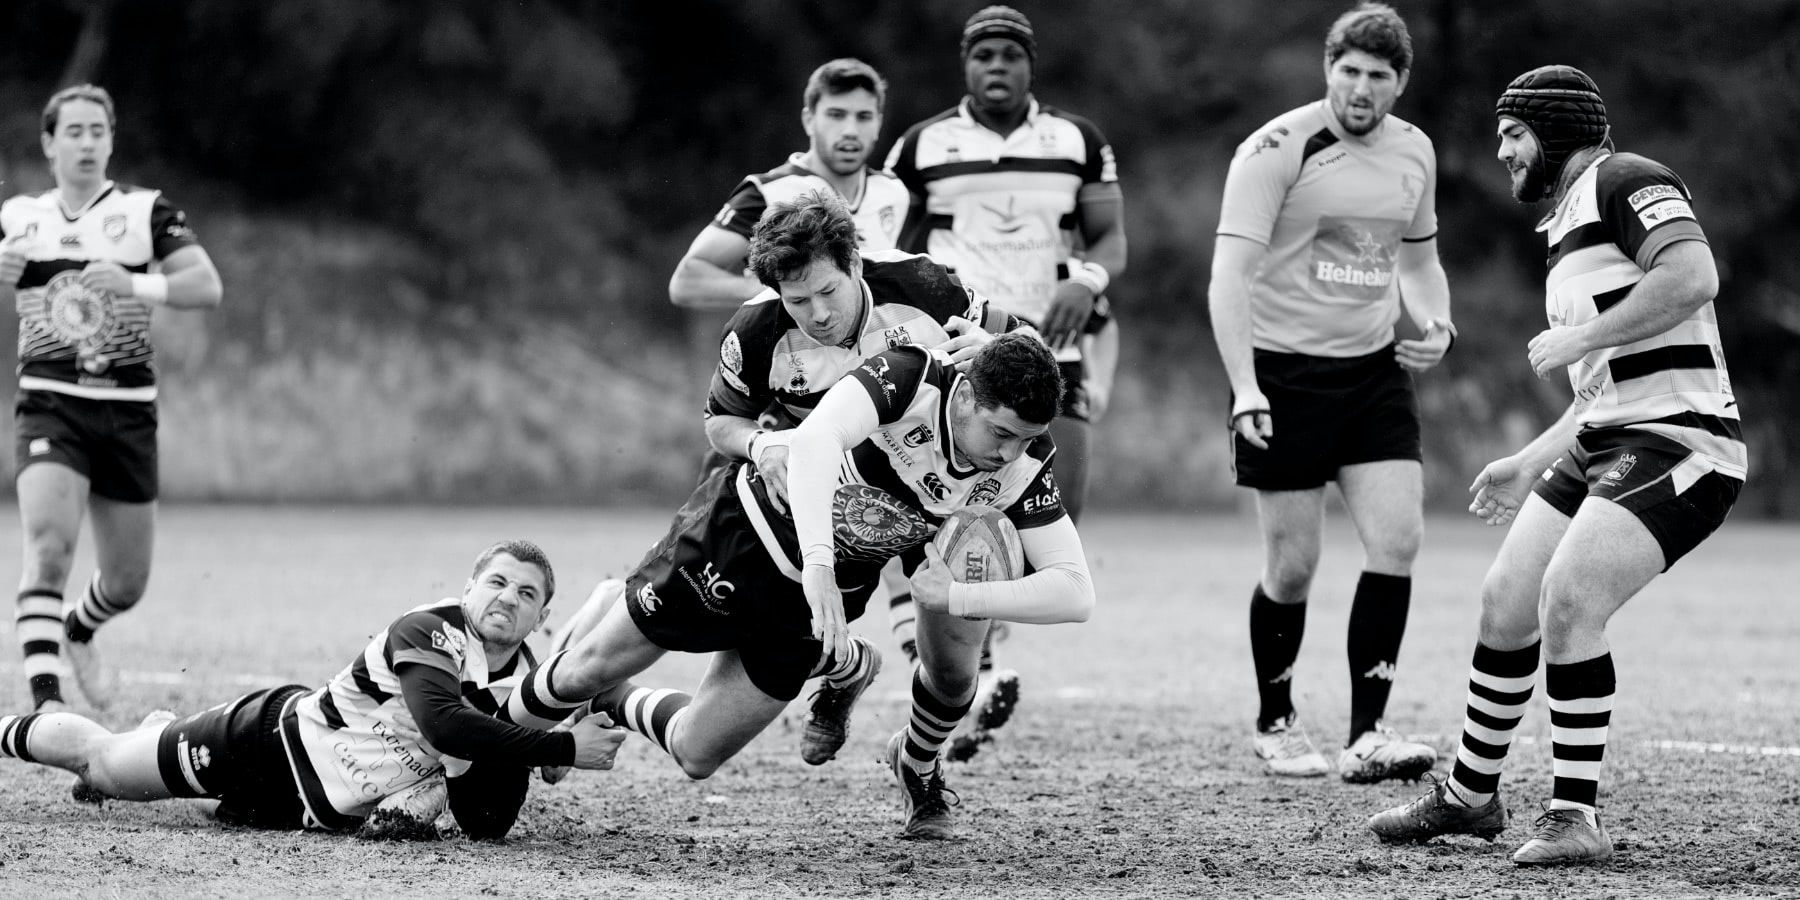 Rugby players mid-tackle.